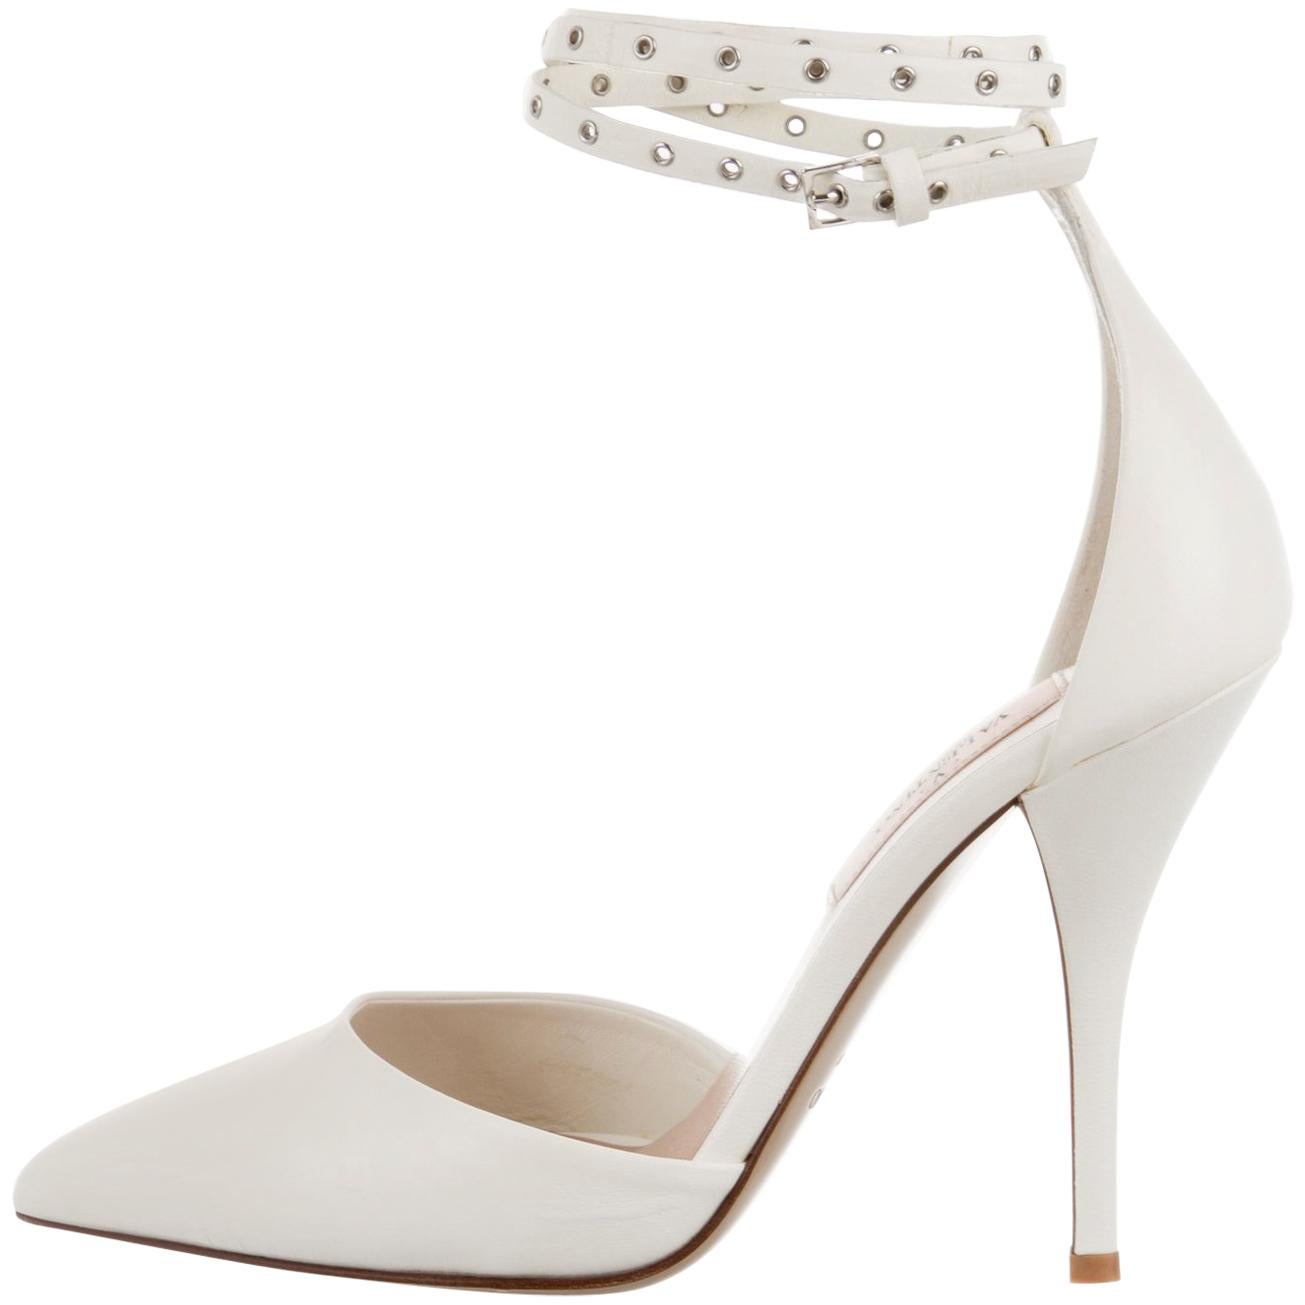 Valentino NEW White Leather Silver Stud Evening Sandals Pumps Heels in Box